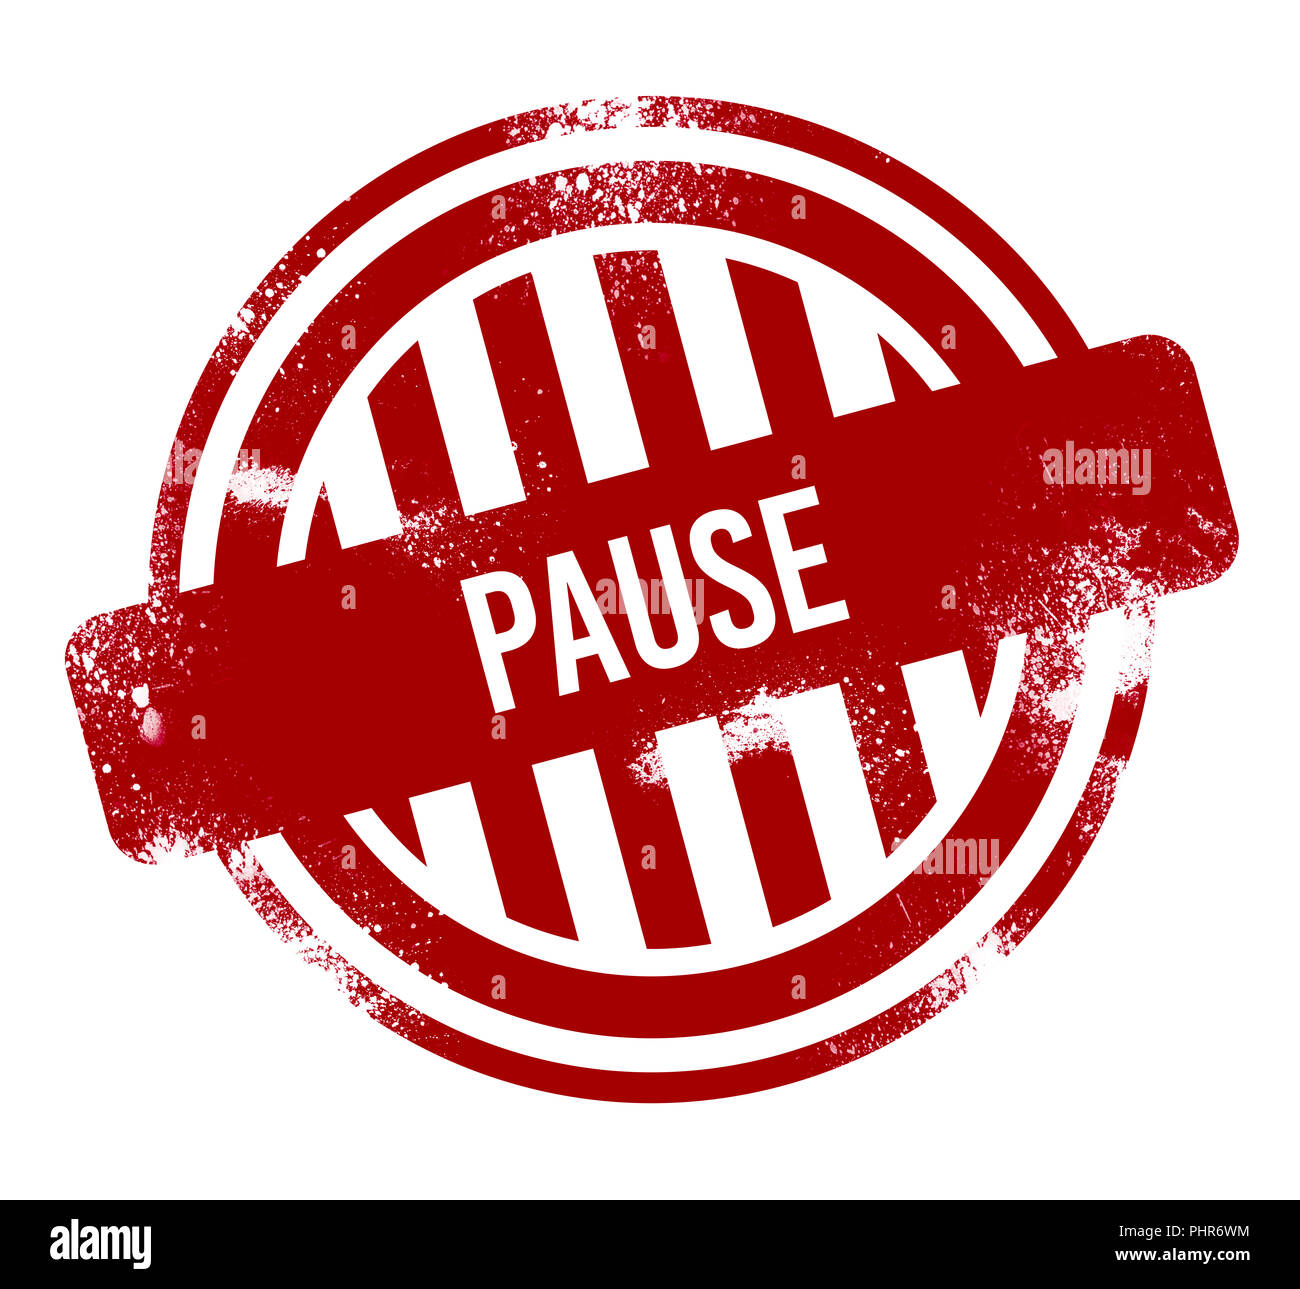 Pause - red grunge button, stamp Stock Photo